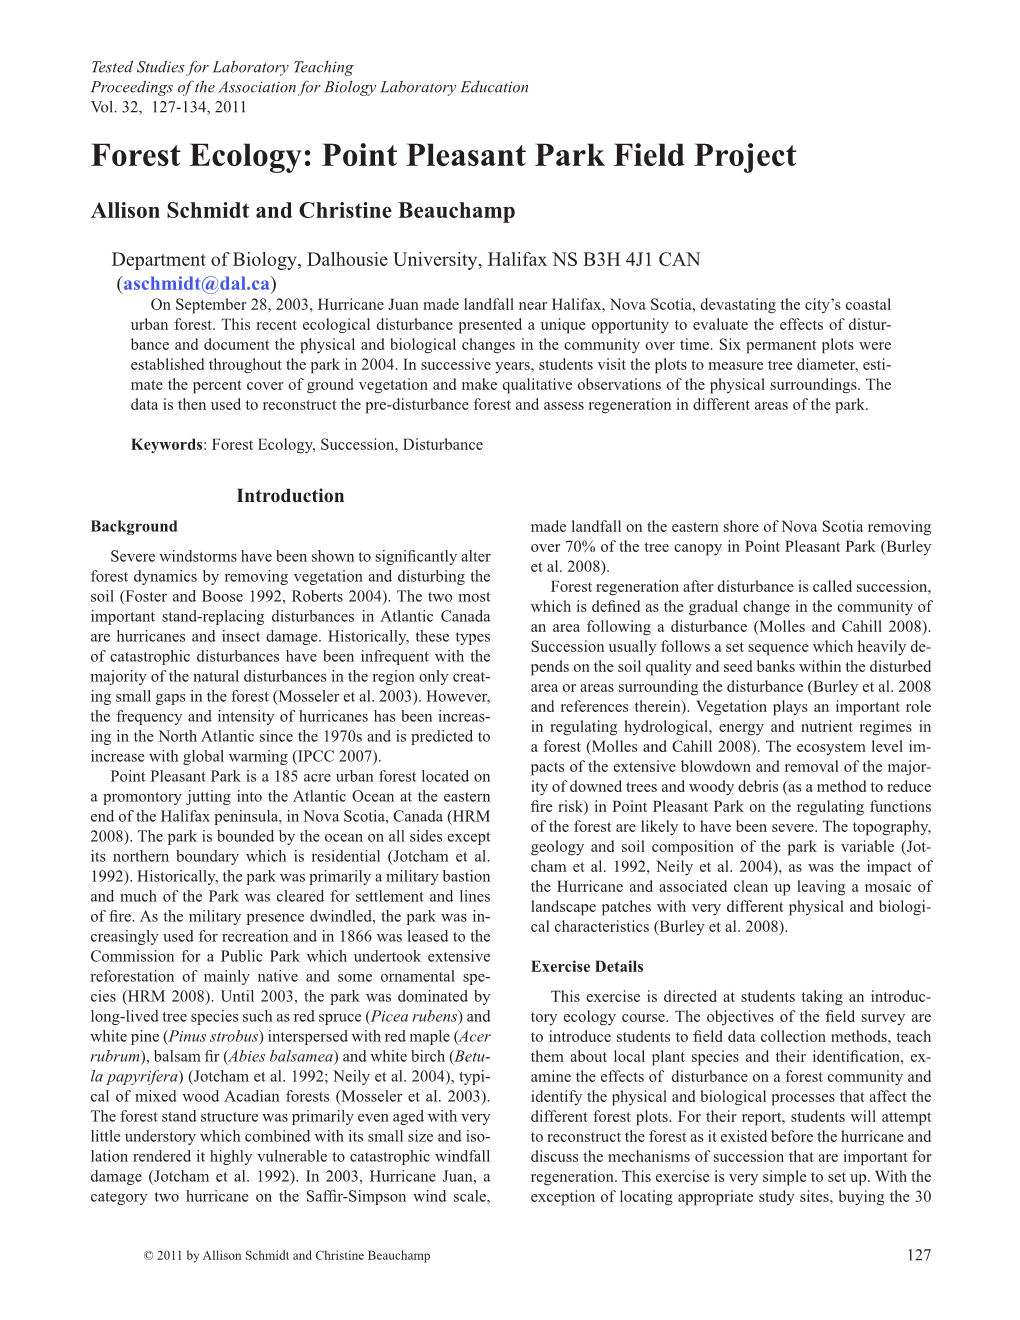 Forest Ecology: Point Pleasant Park Field Project